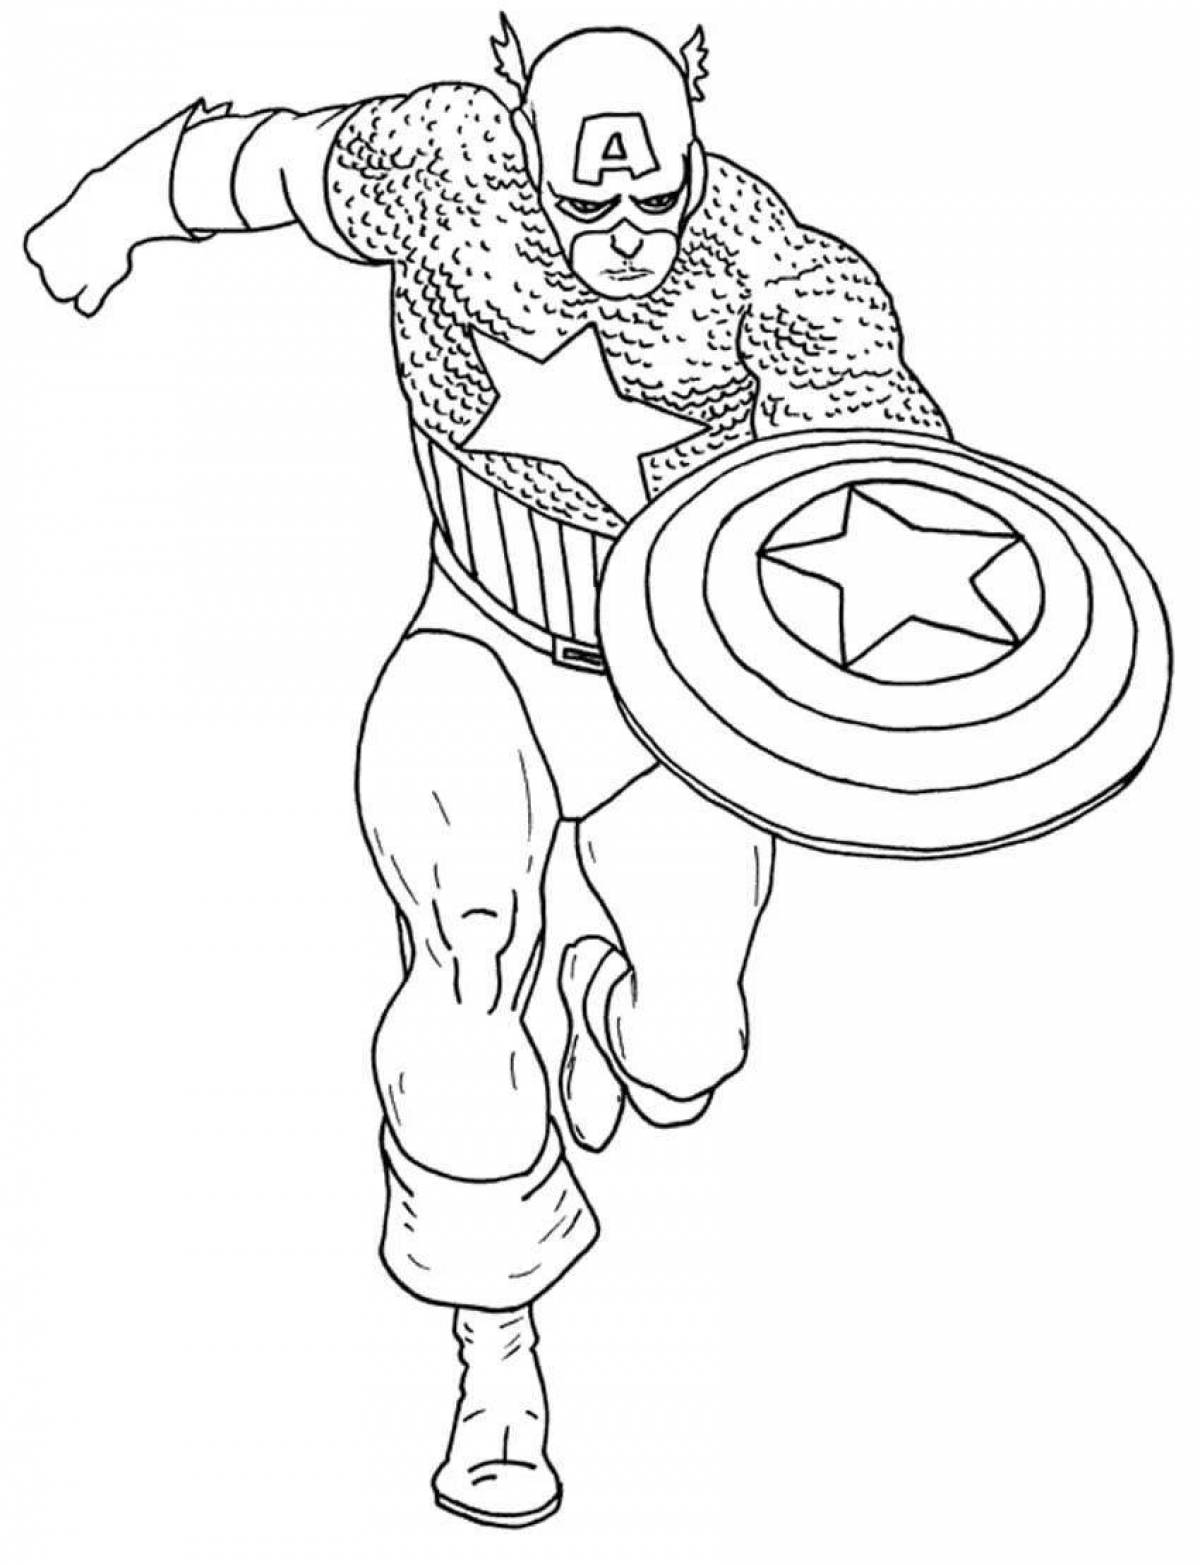 Marvel superheroes dazzling coloring book for boys